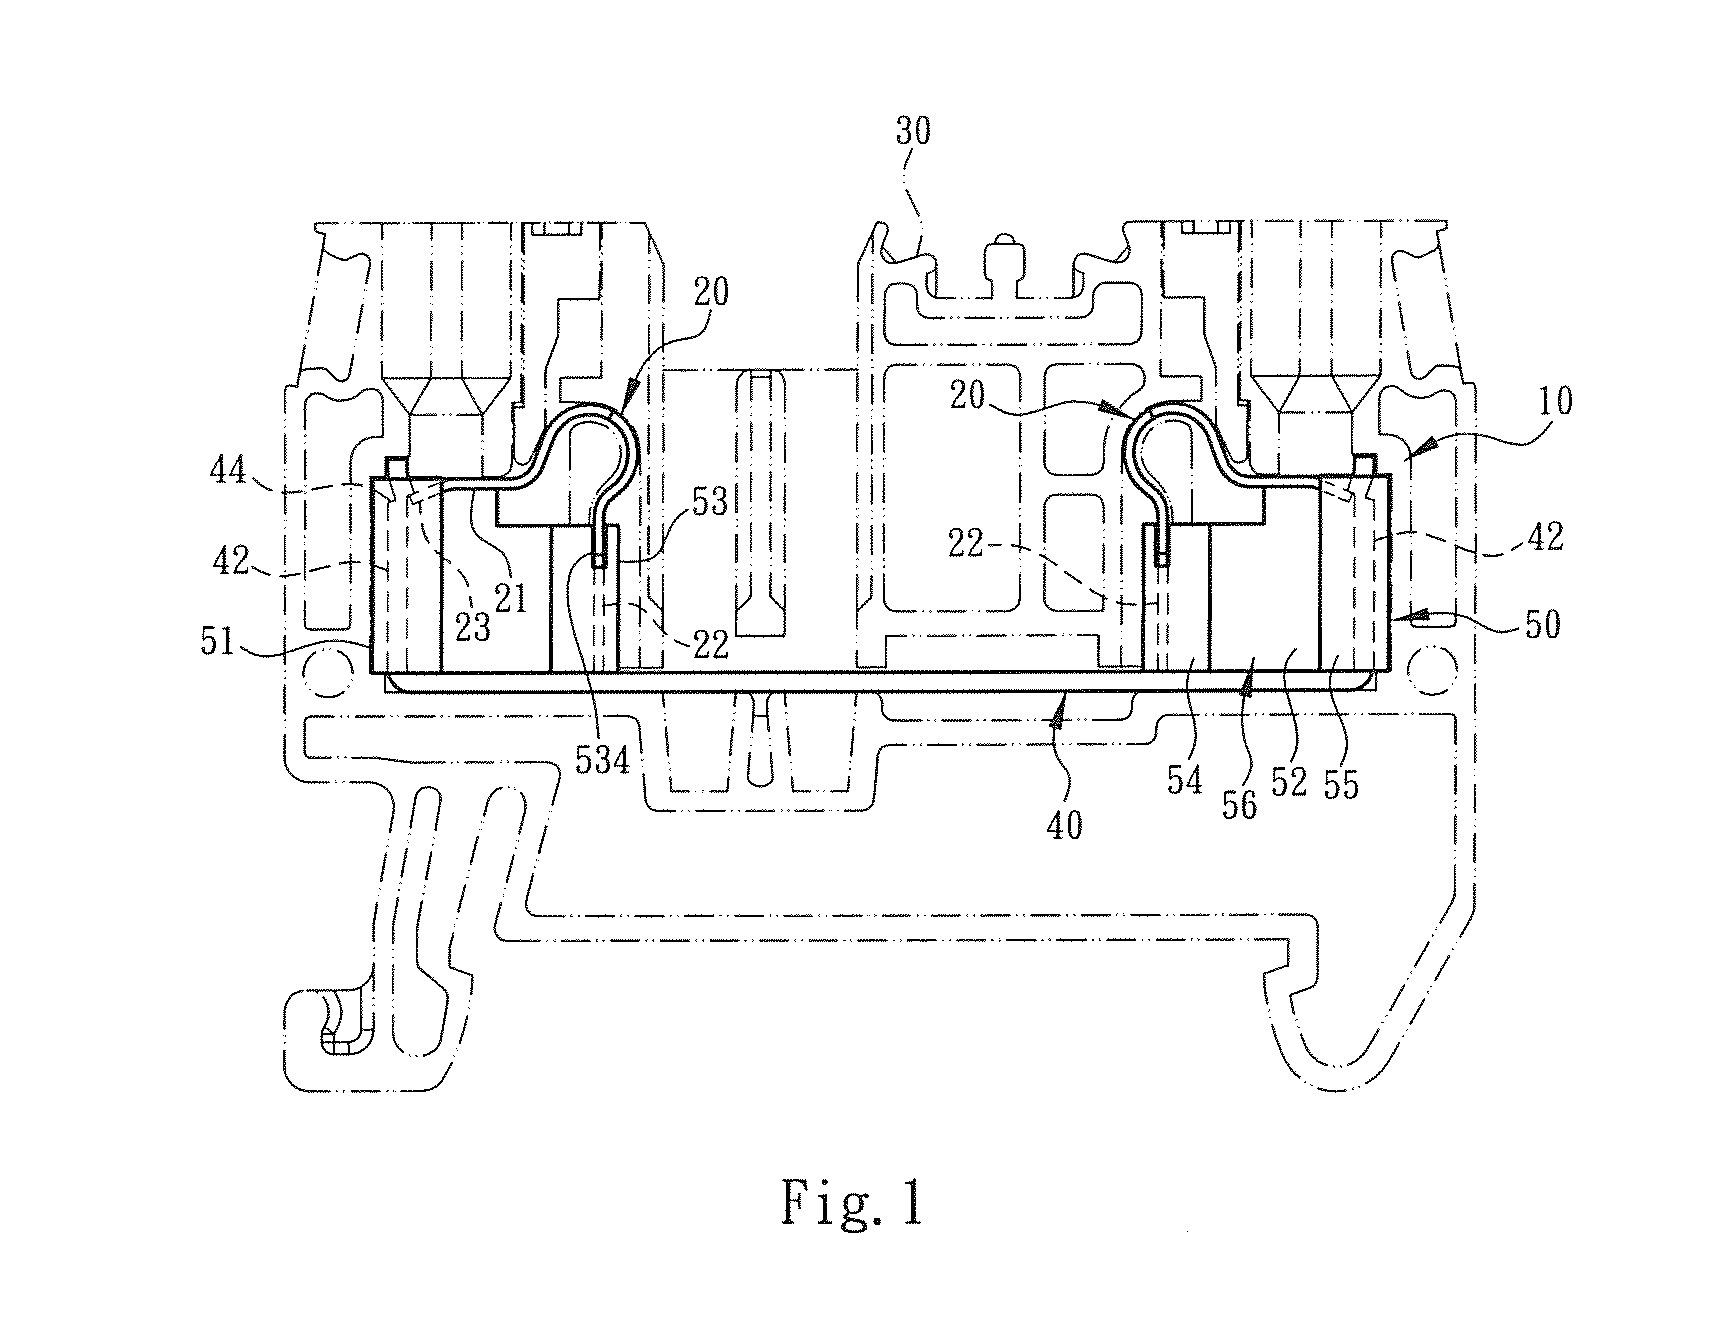 Conductive wire connection structure of rail-type electrical terminal